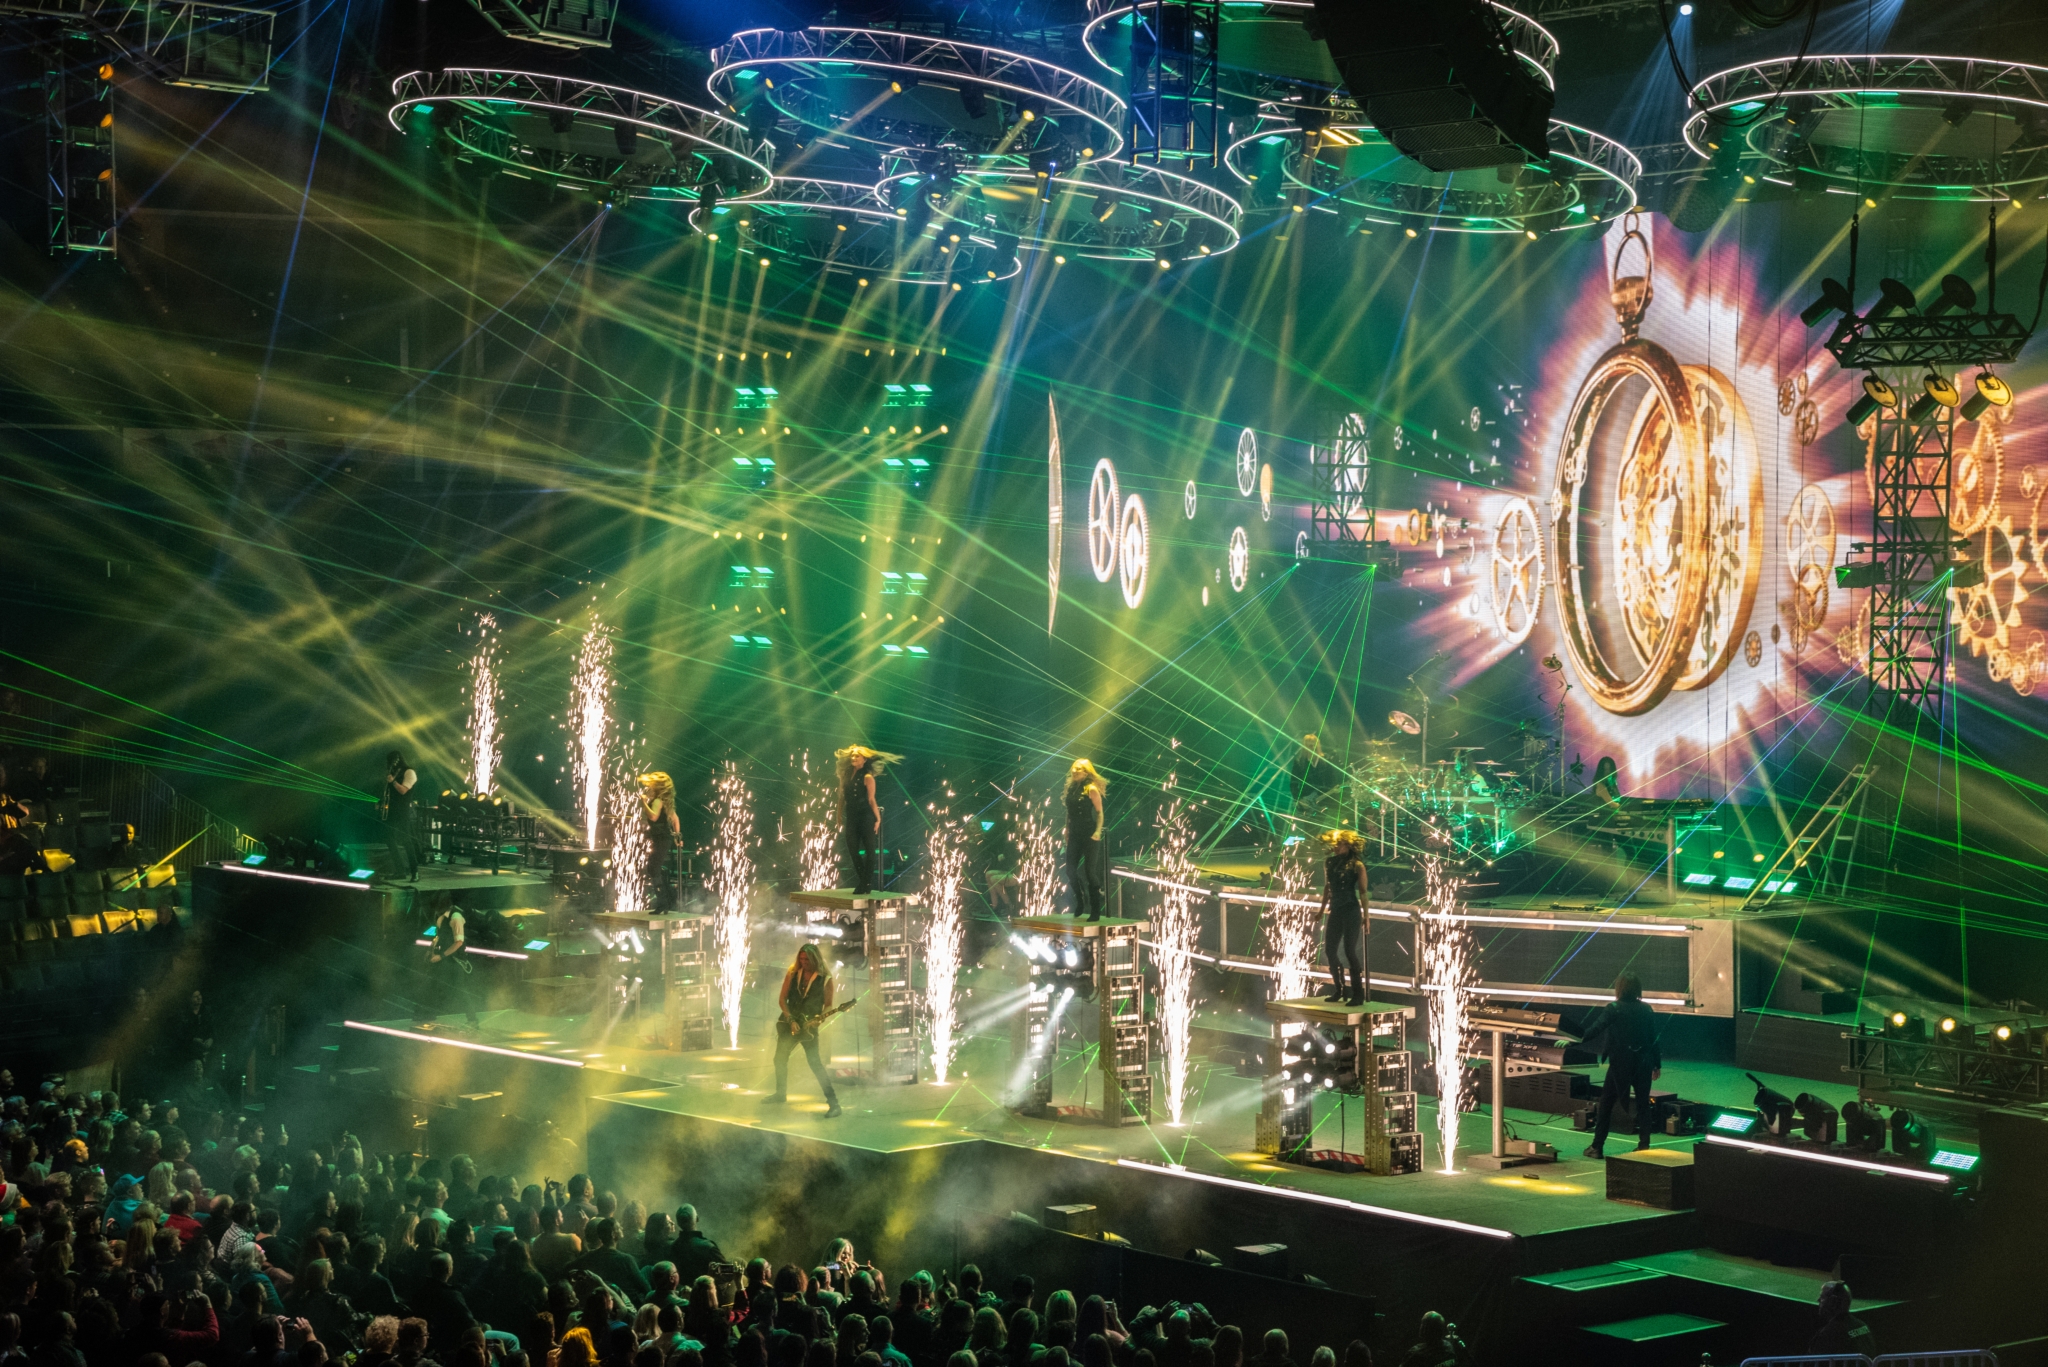 Trans-Siberian Orchestra puts on quite the show